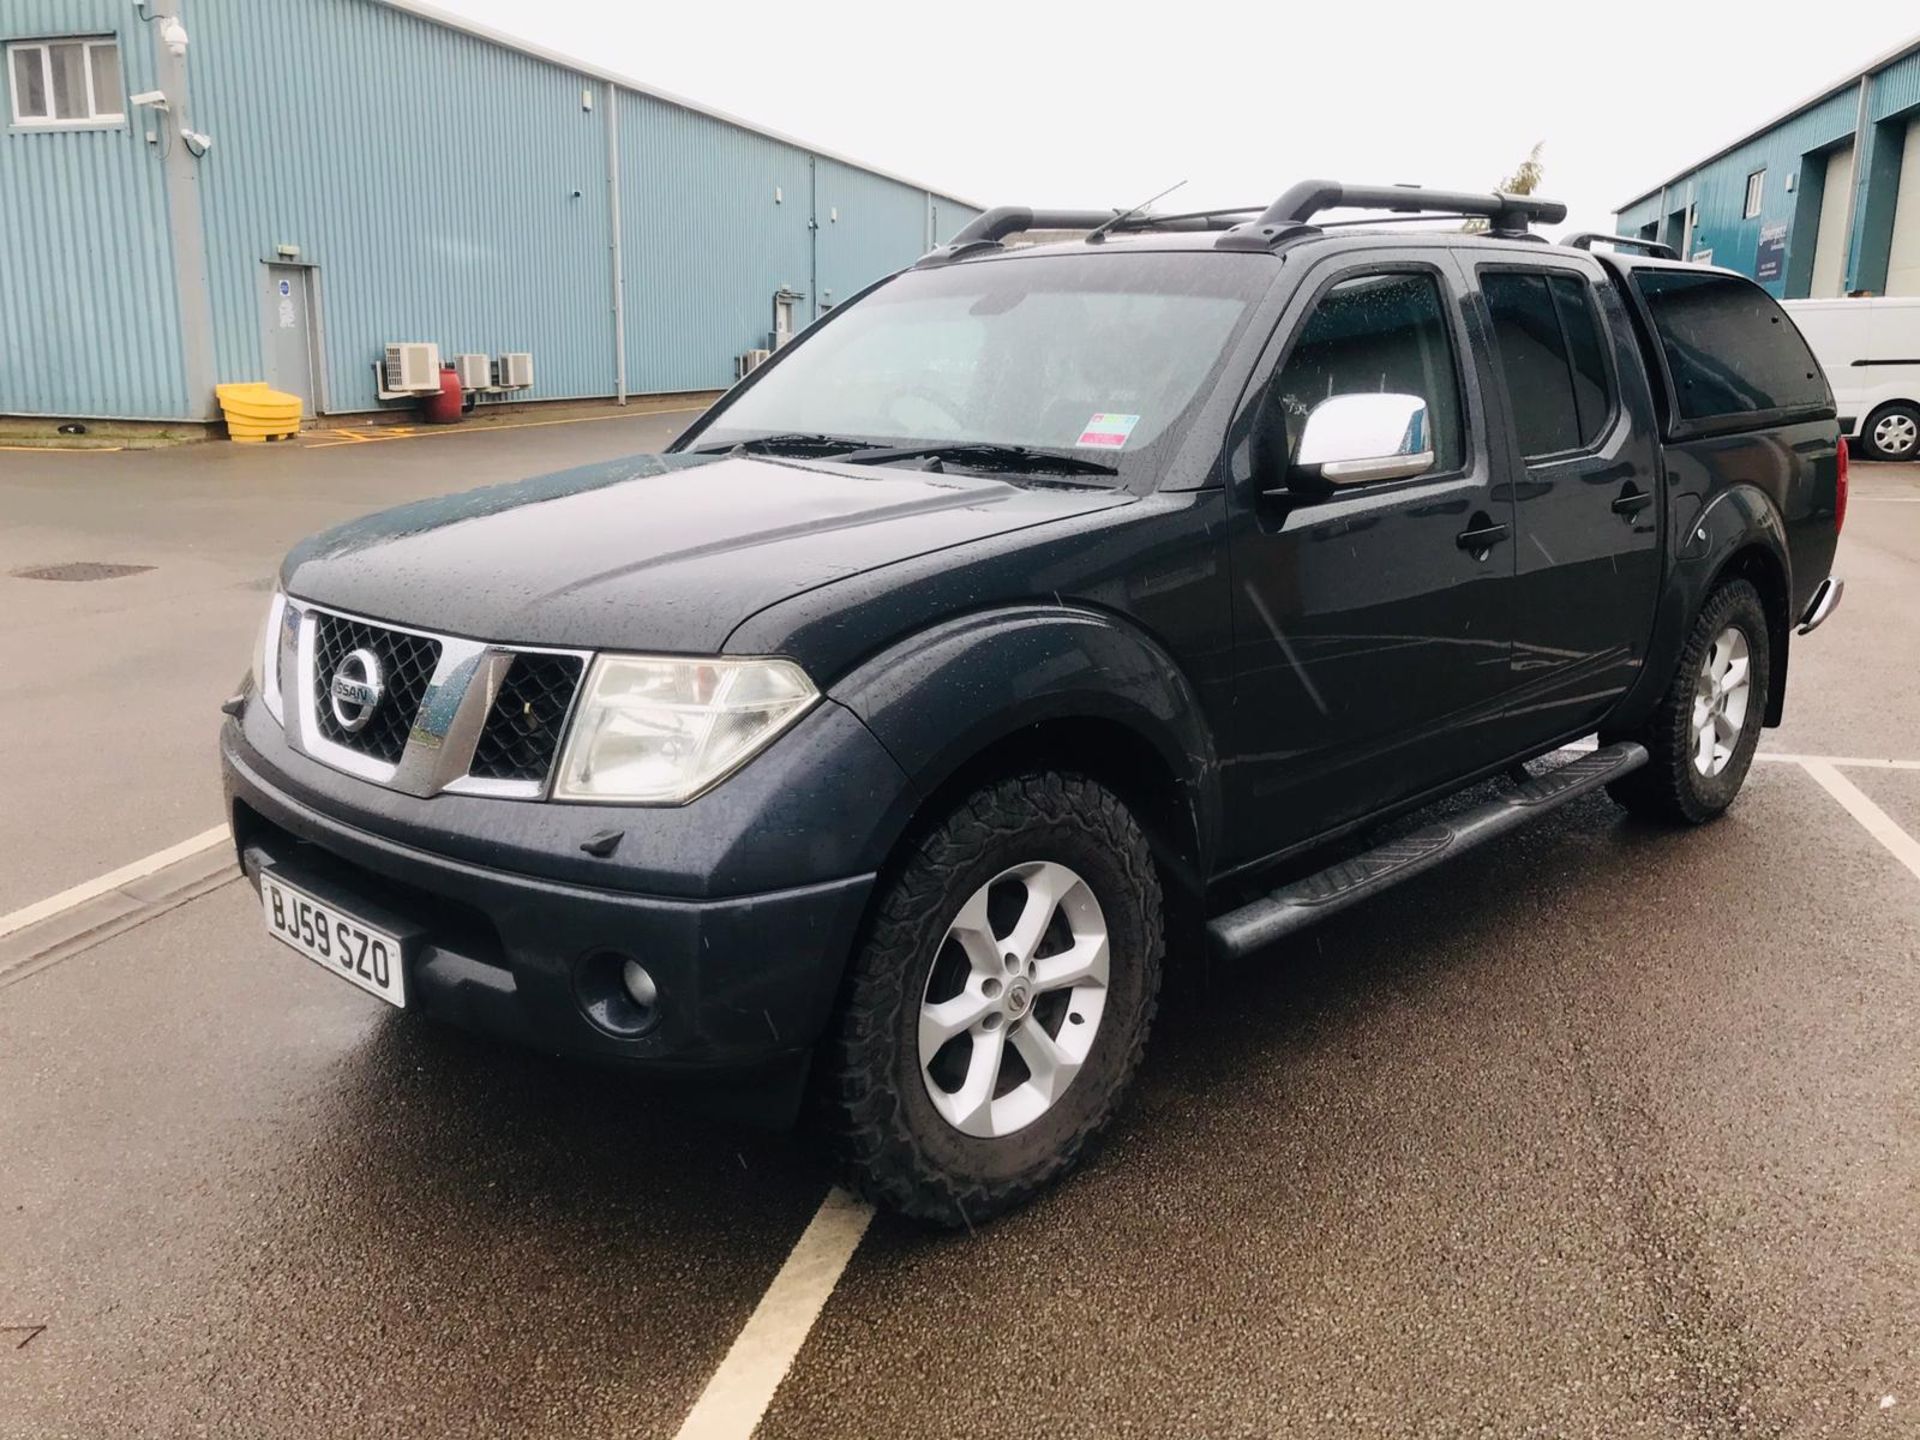 (RESERVE MET) Nissan Navara 2.5 DCI Tekna Double Cab Auto - 2010 Model - 1 Keeper From New -